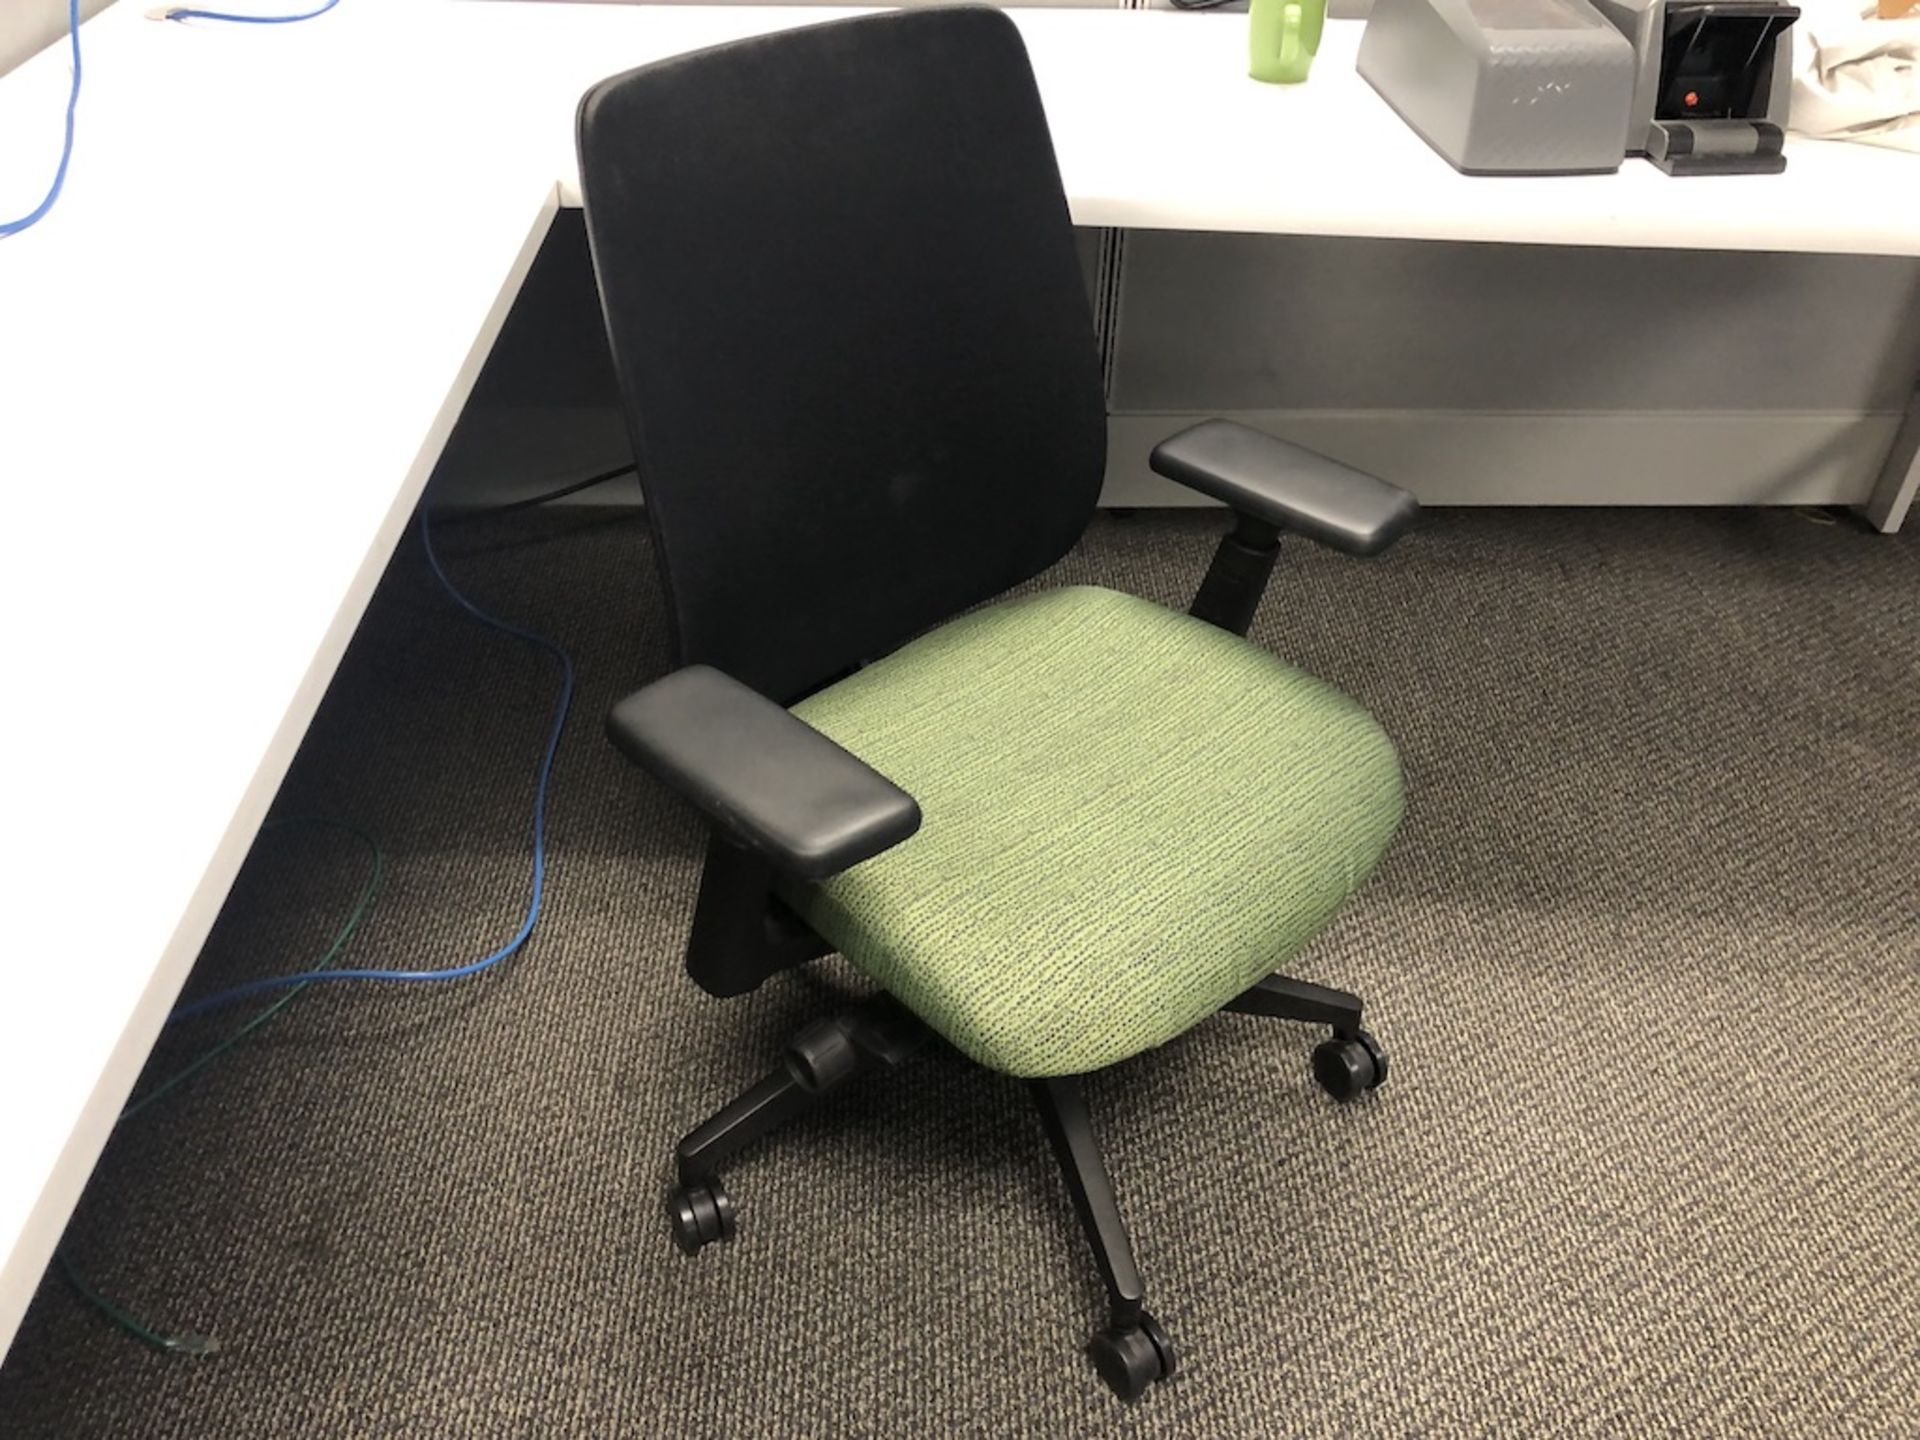 5 CASTER OFFICE CHAIR PADDED ARM REST ( BOTH ARMS THE RUBBER COATING HAS SPLIT ), GREEN SEATED - Image 2 of 3